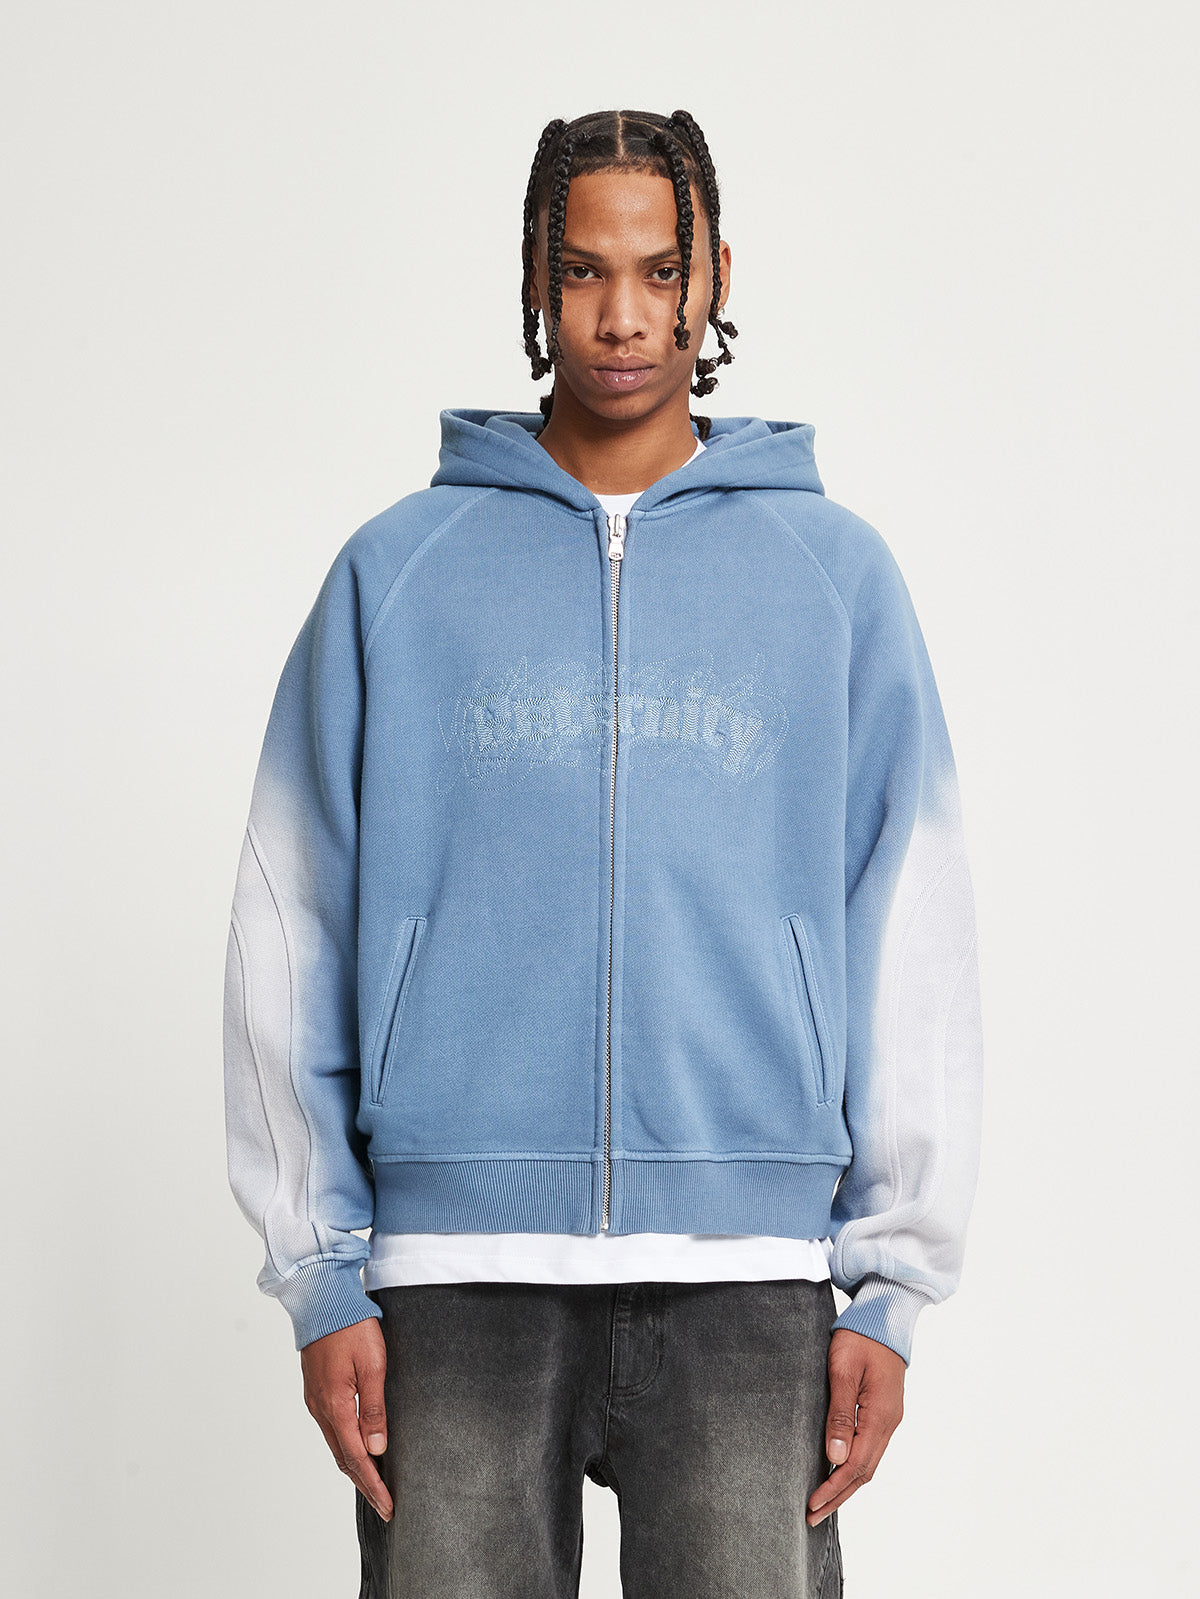 EMBROIDERED ZIP-HOODIE - FADED BLUE-GREY